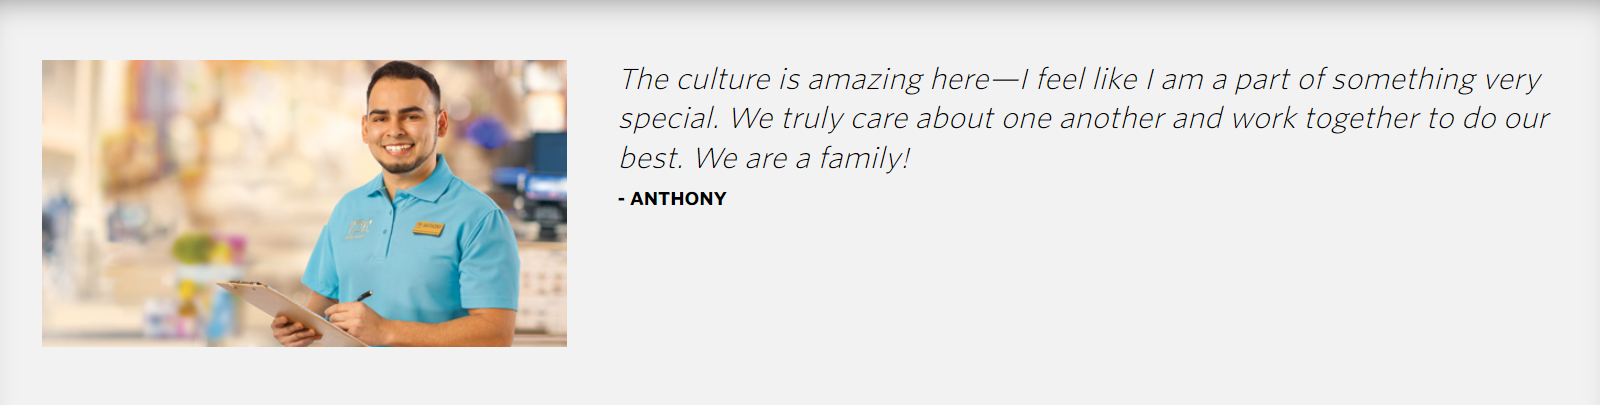 Employee quote: "The culture is amazing here—I feel like I am a part of something very special. We truly care about one another and work together to do our best. We are a family!"  - ANTHONY